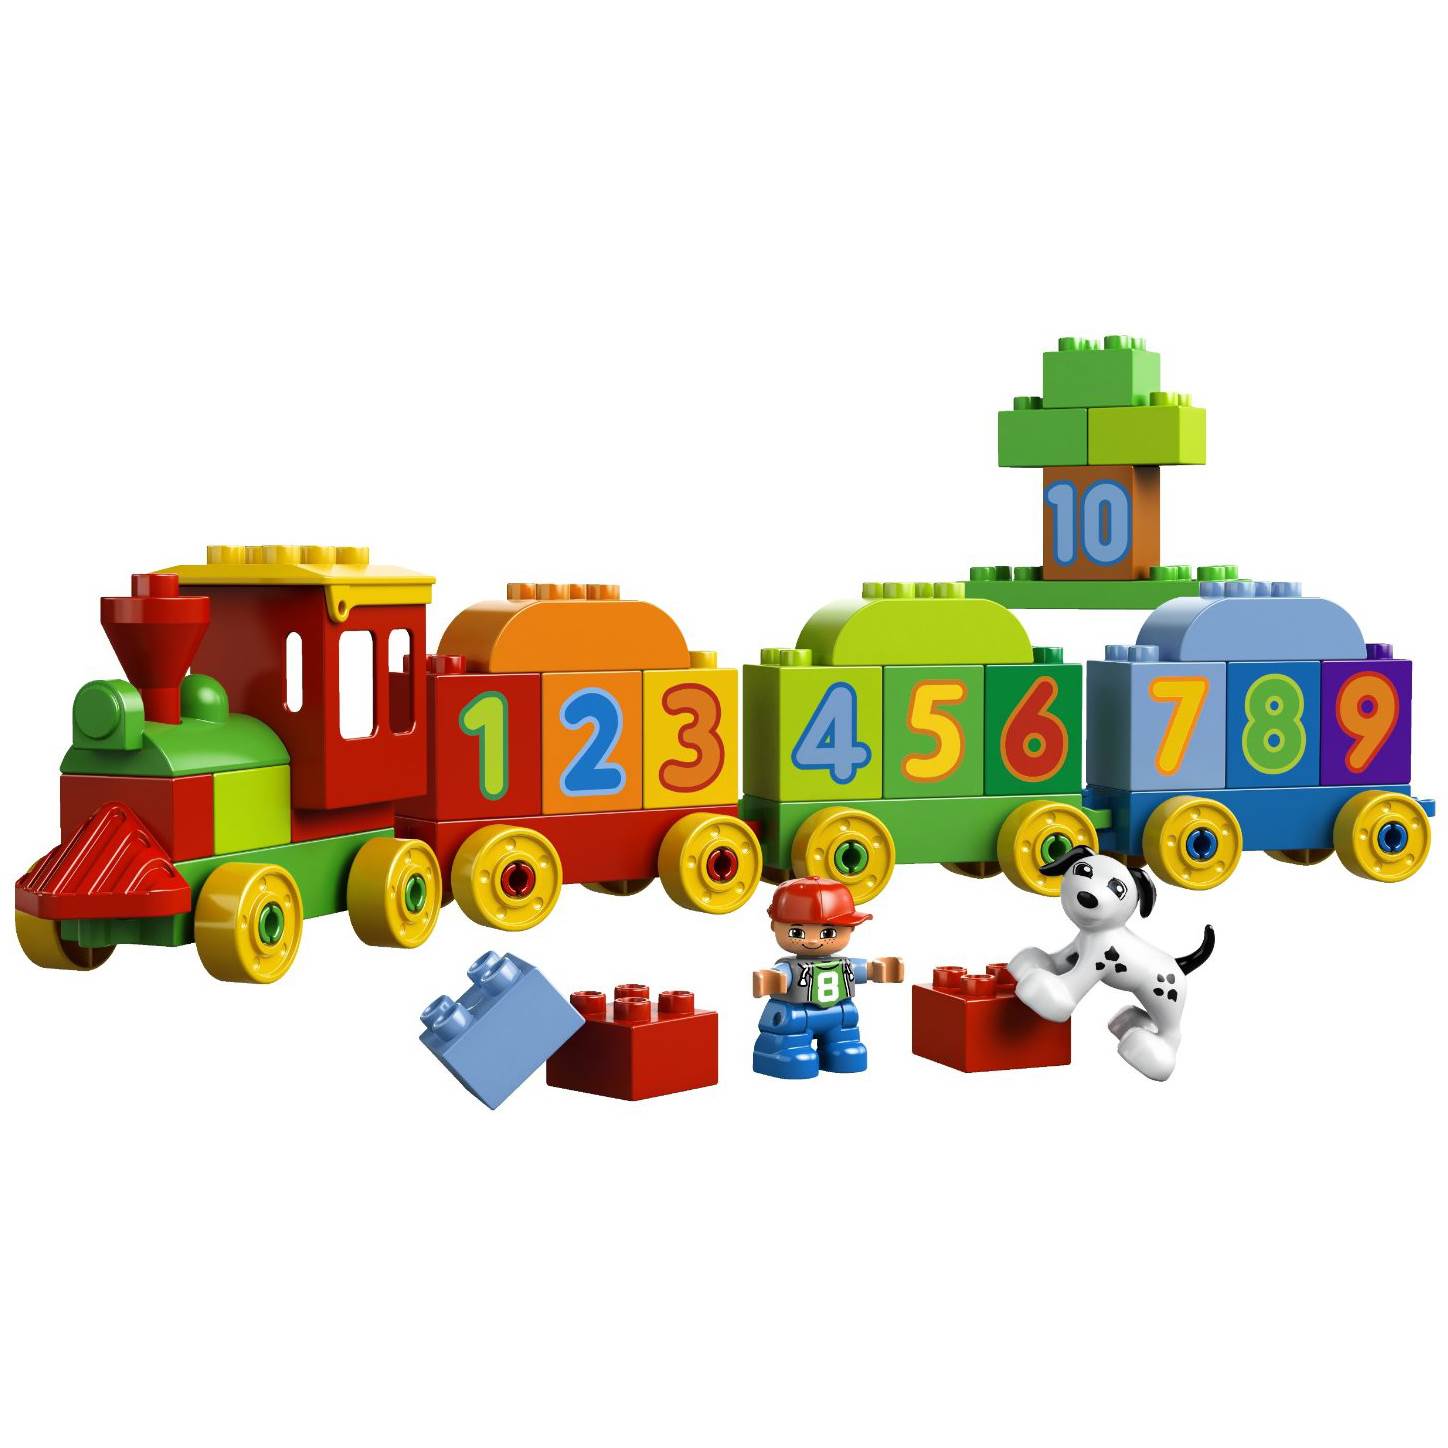 LEGO DUPLO My First Number Train Building Set 10558 - image 1 of 7